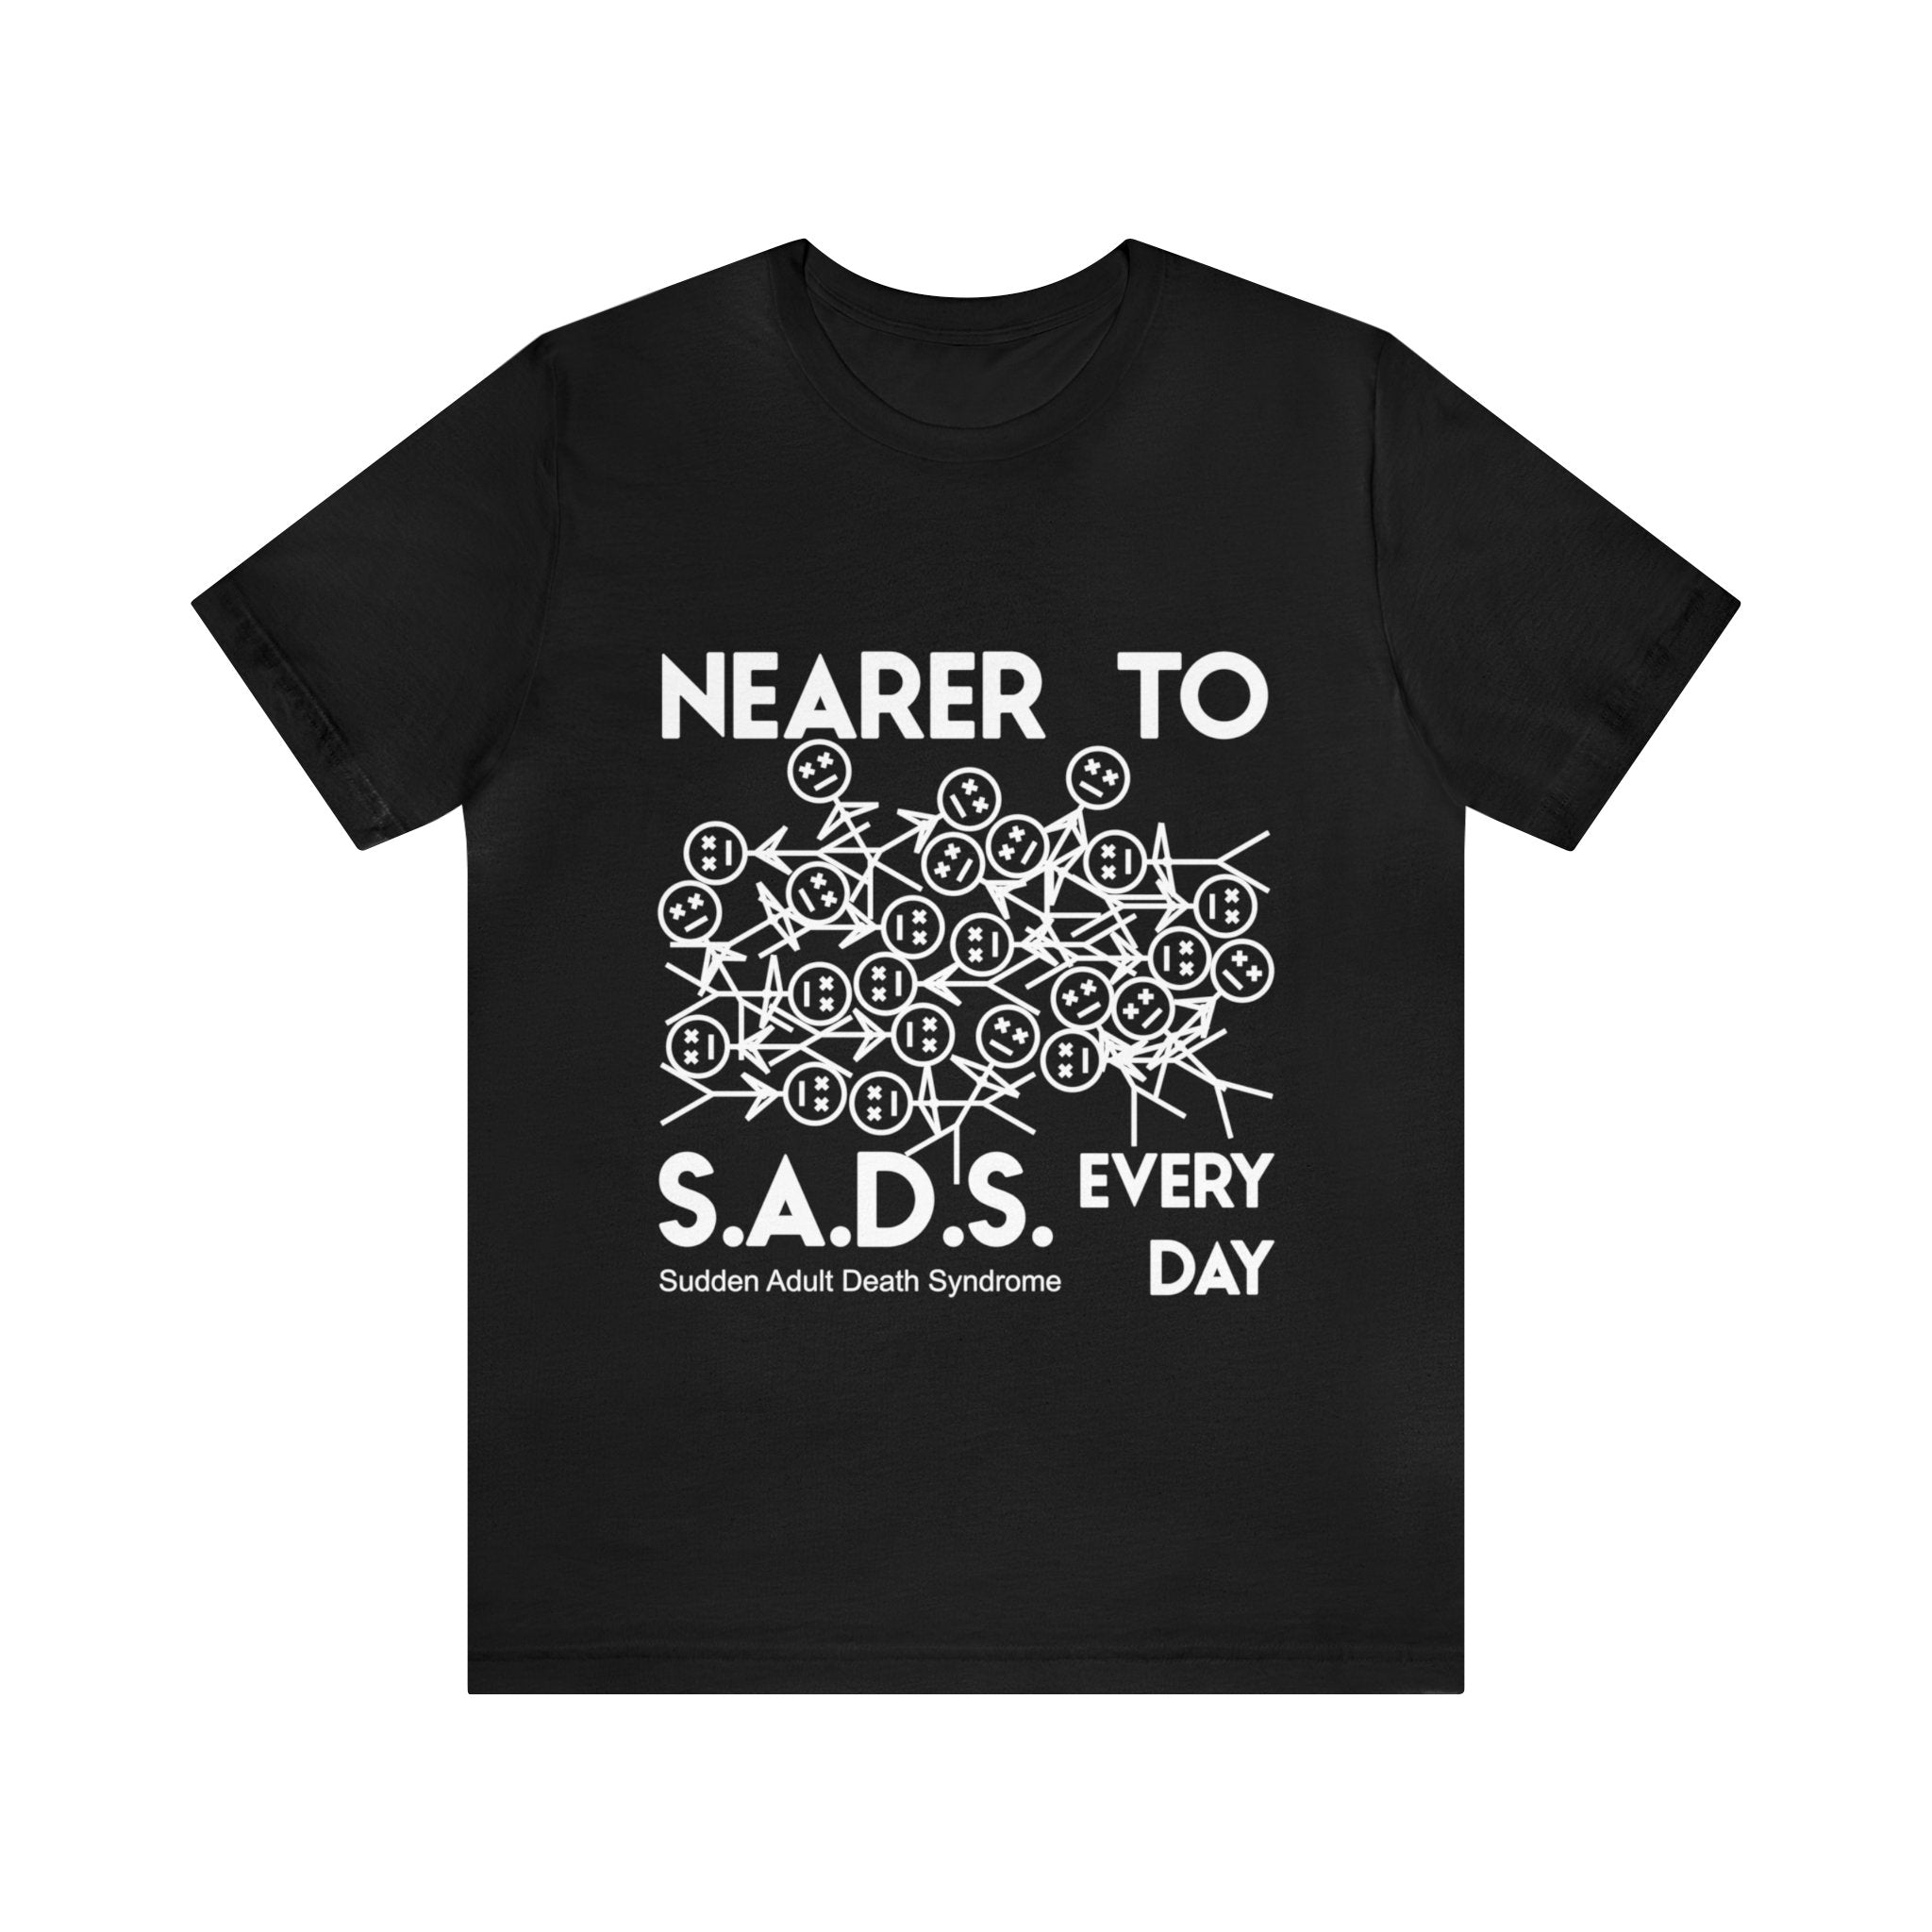 Nearer to S.A.D.S. Every Day